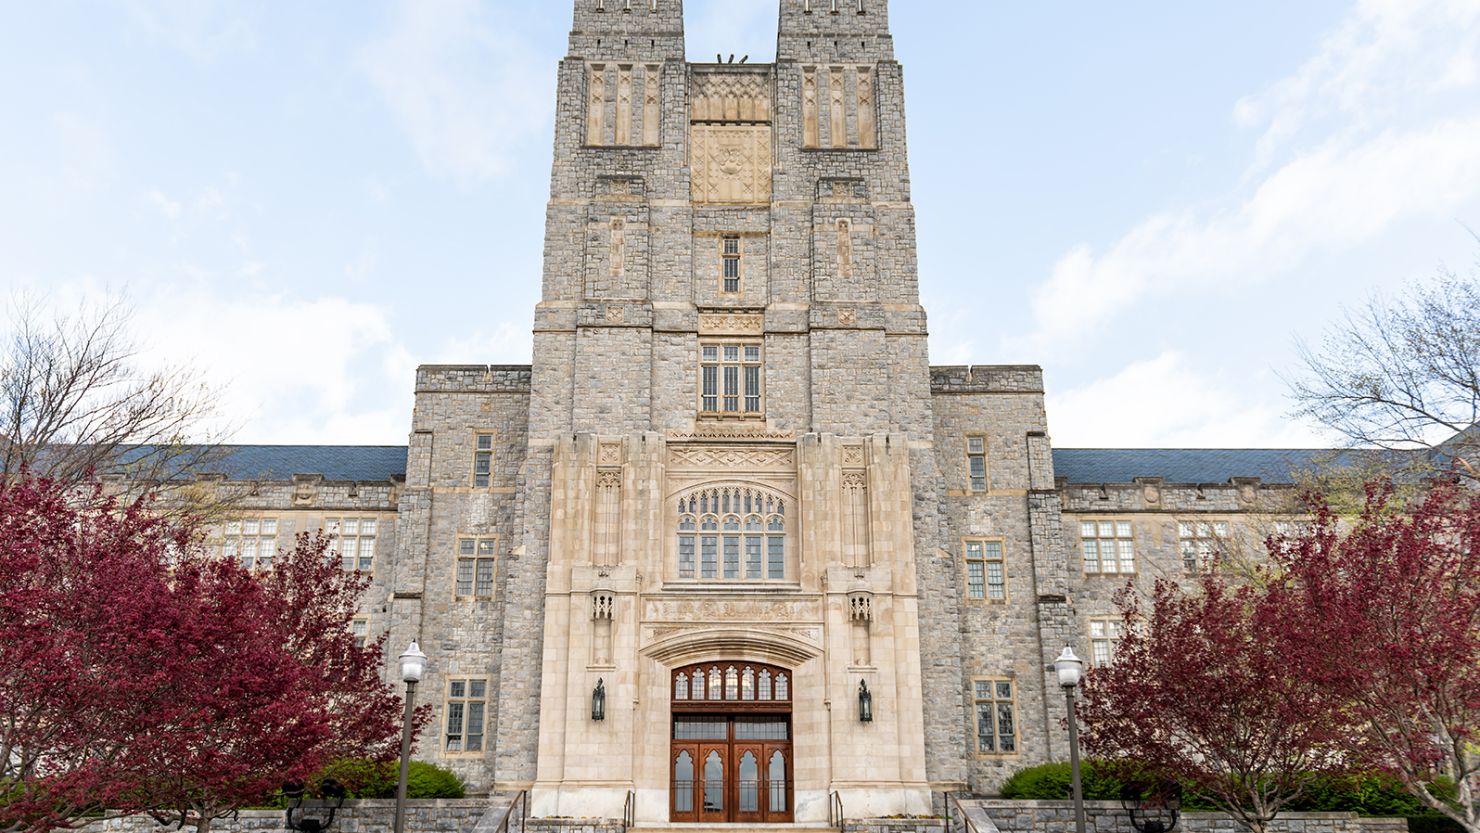 Virginia Tech is renaming two campus dormitories that were previously named after two men with racist views